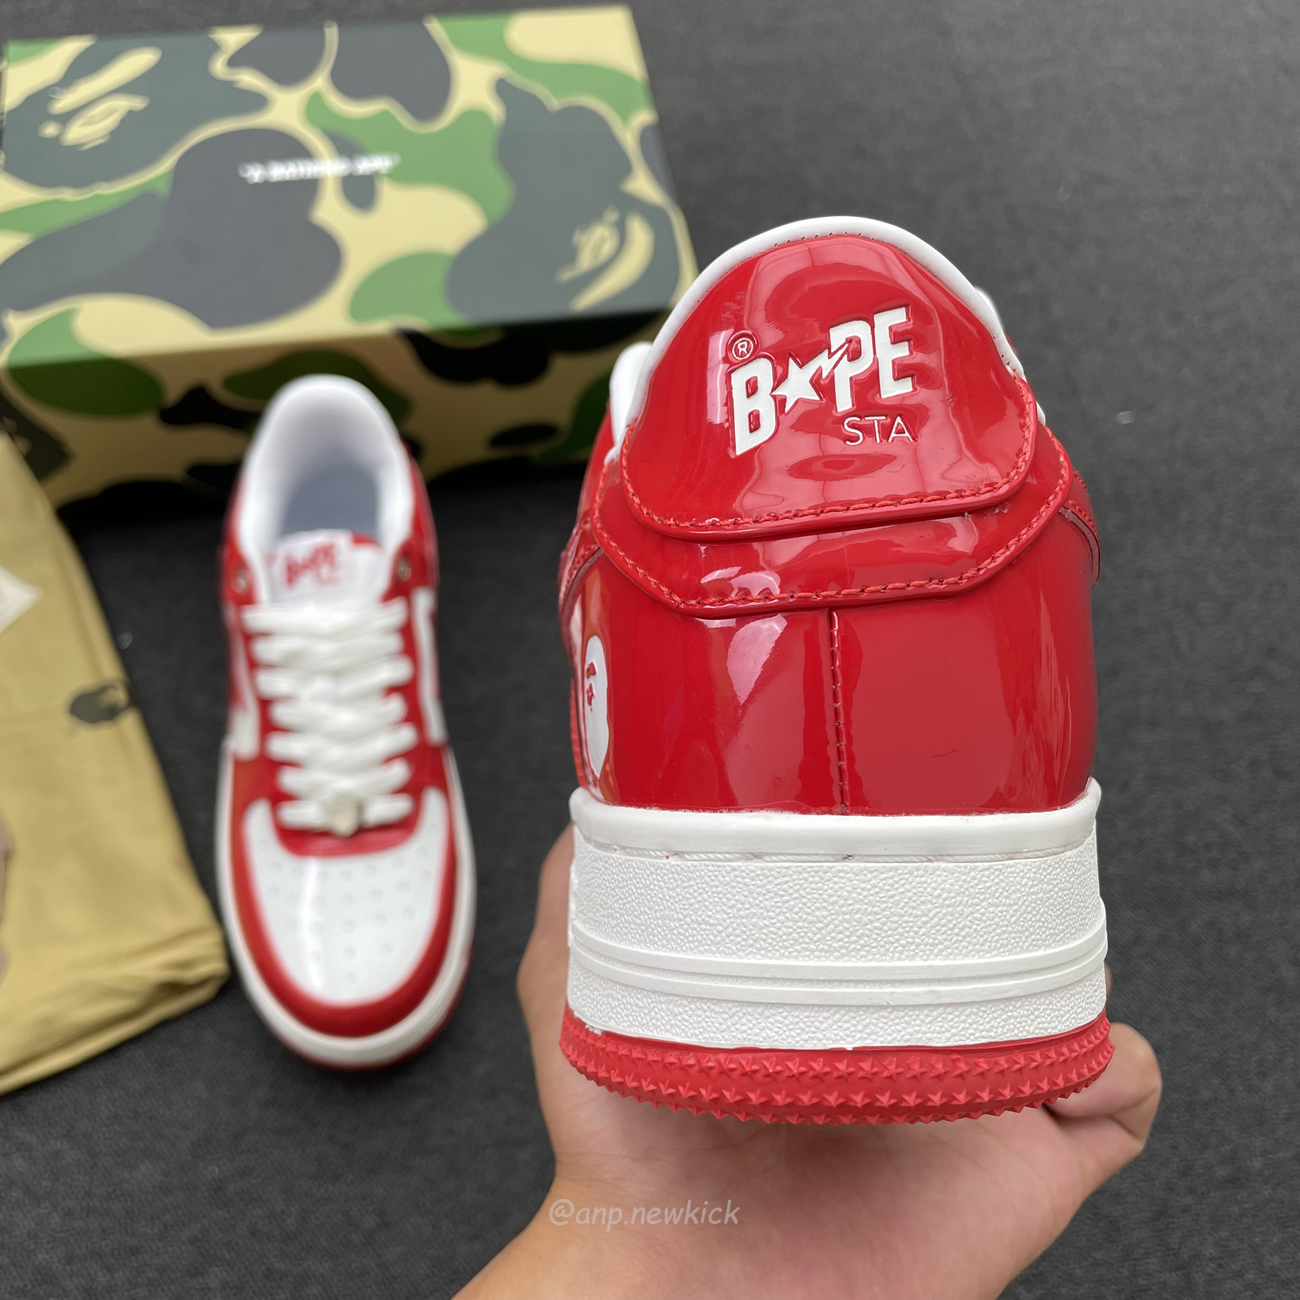 A Bathing Ape Bape Sta Patent Leather White Red 1i70 291 021 (3) - www.newkick.org